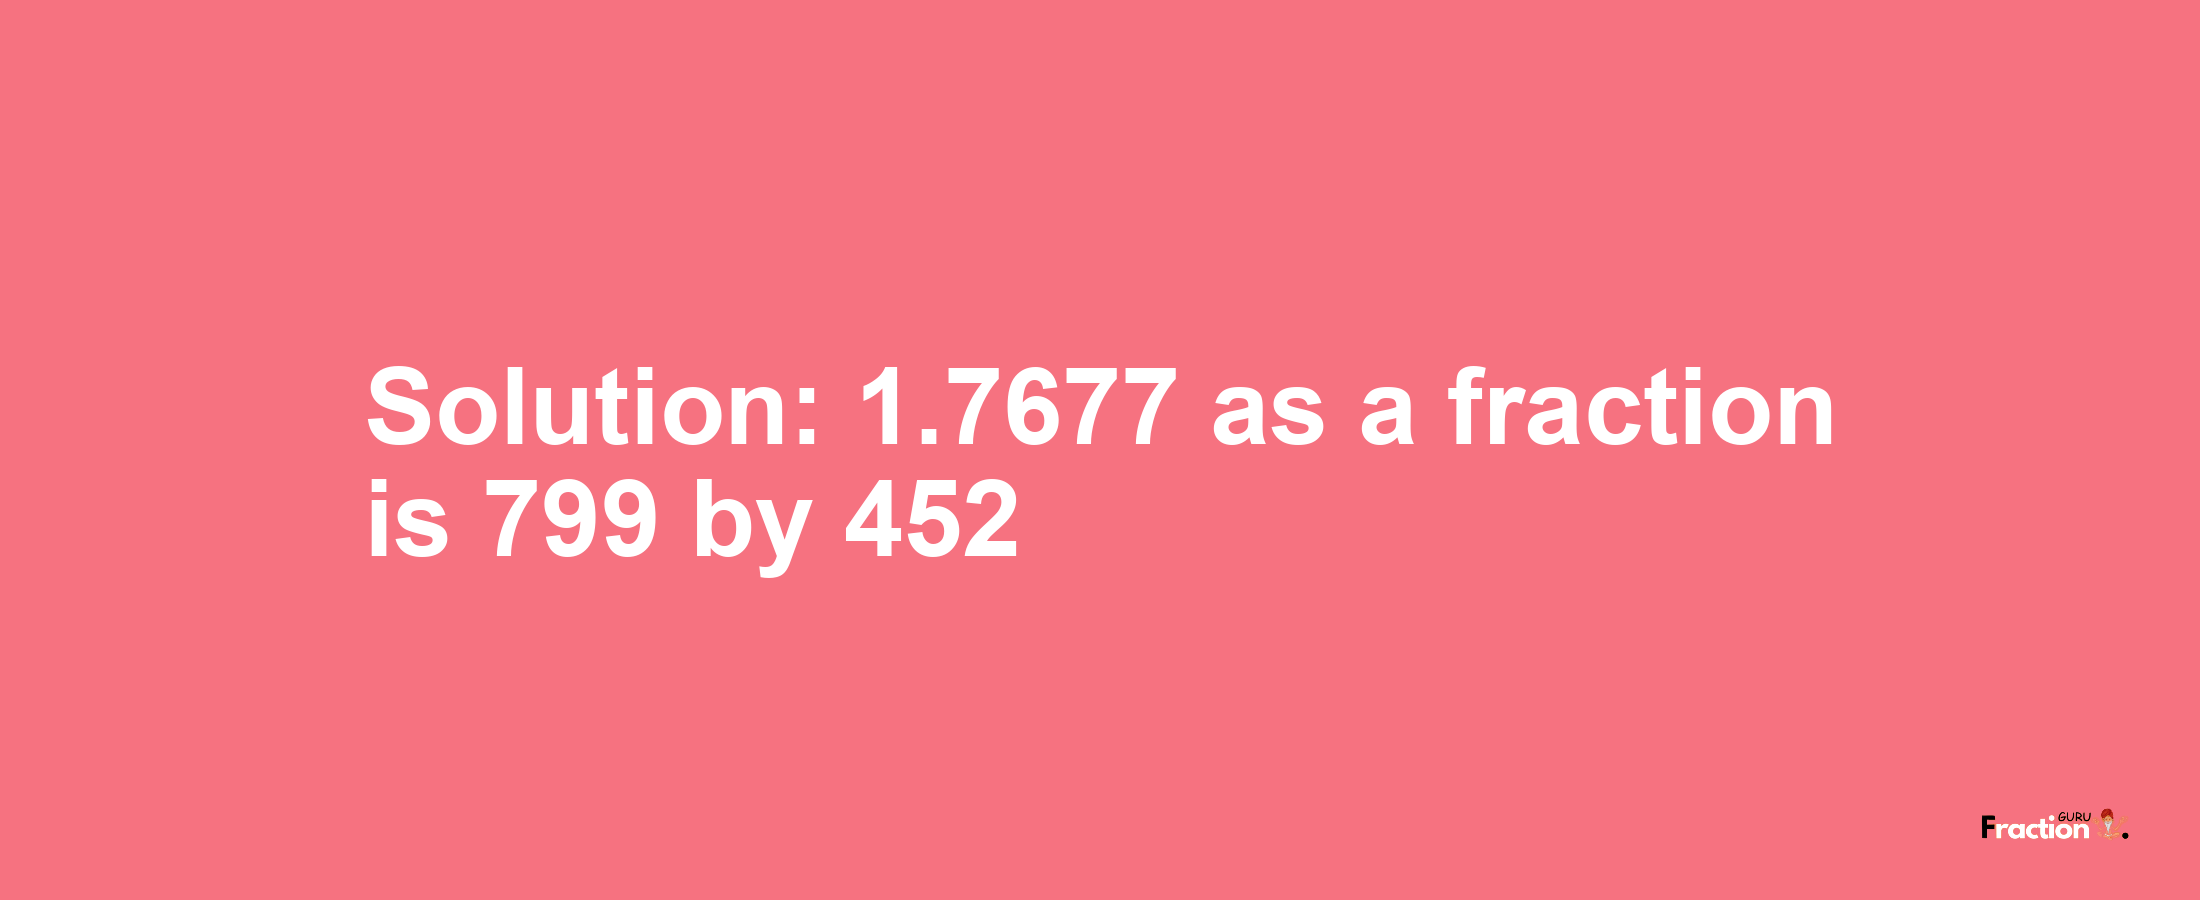 Solution:1.7677 as a fraction is 799/452